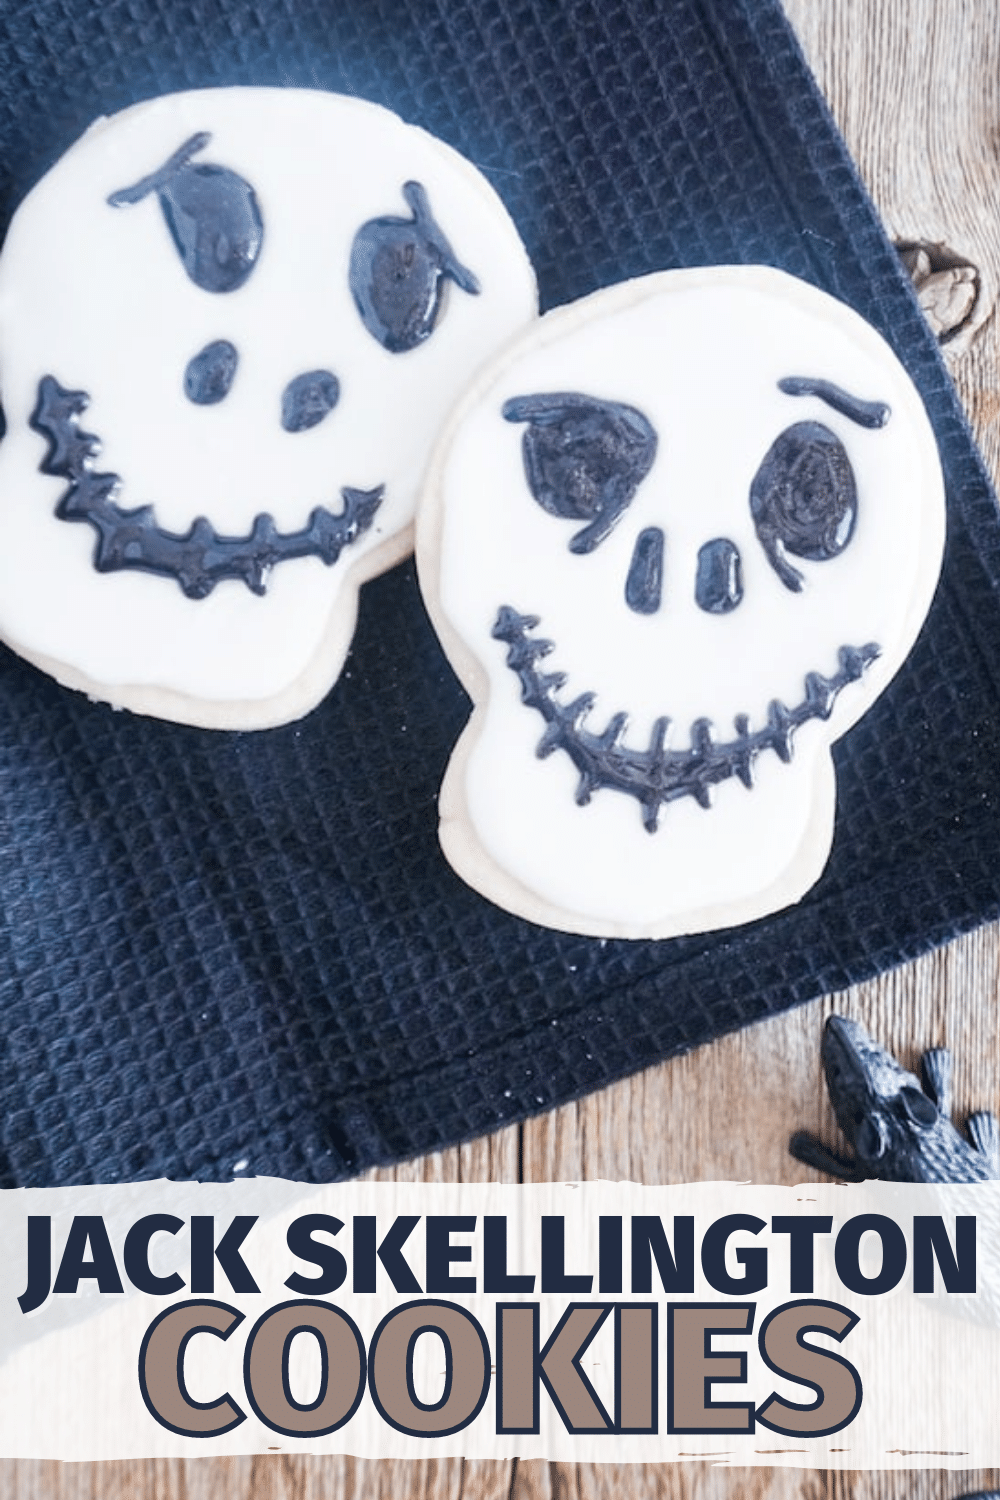 These easy Jack Skellington cookies are so simple, but really fun. And, the best part, there are plenty to go around to share on Halloween--or Christmas. #jackskellington #cookierecipe #halloween #christmas via @wondermomwannab